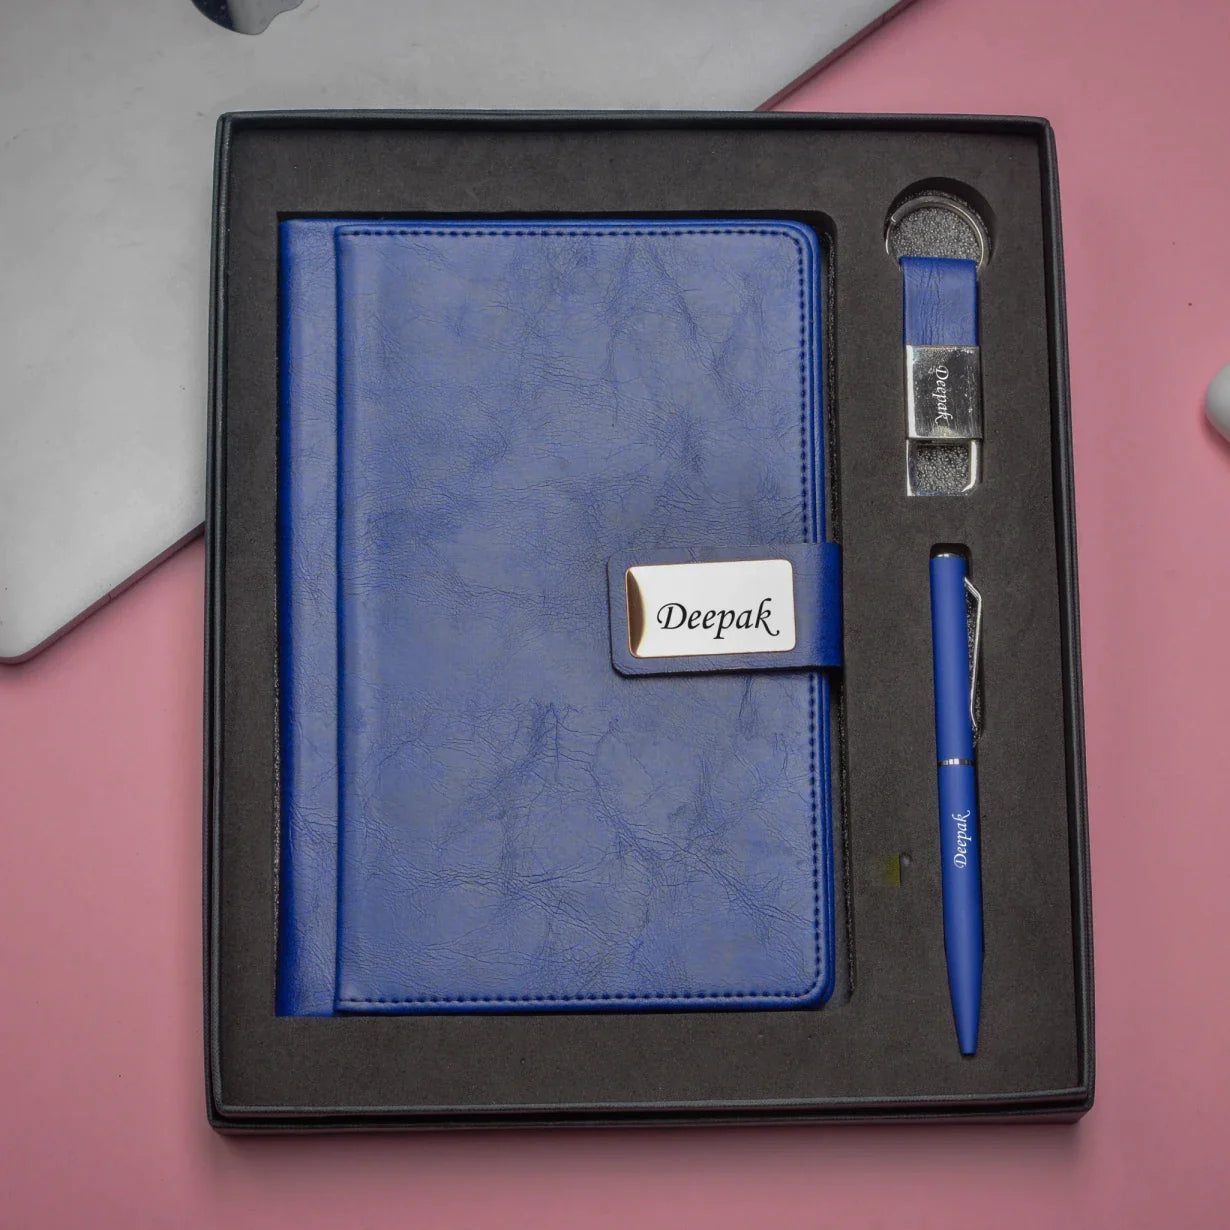 "Stay organized and on-the-go with our ultimate corporate combo. Our high-quality diary, sleek pen, and practical keychain will help you tackle any task, no matter where life takes you."